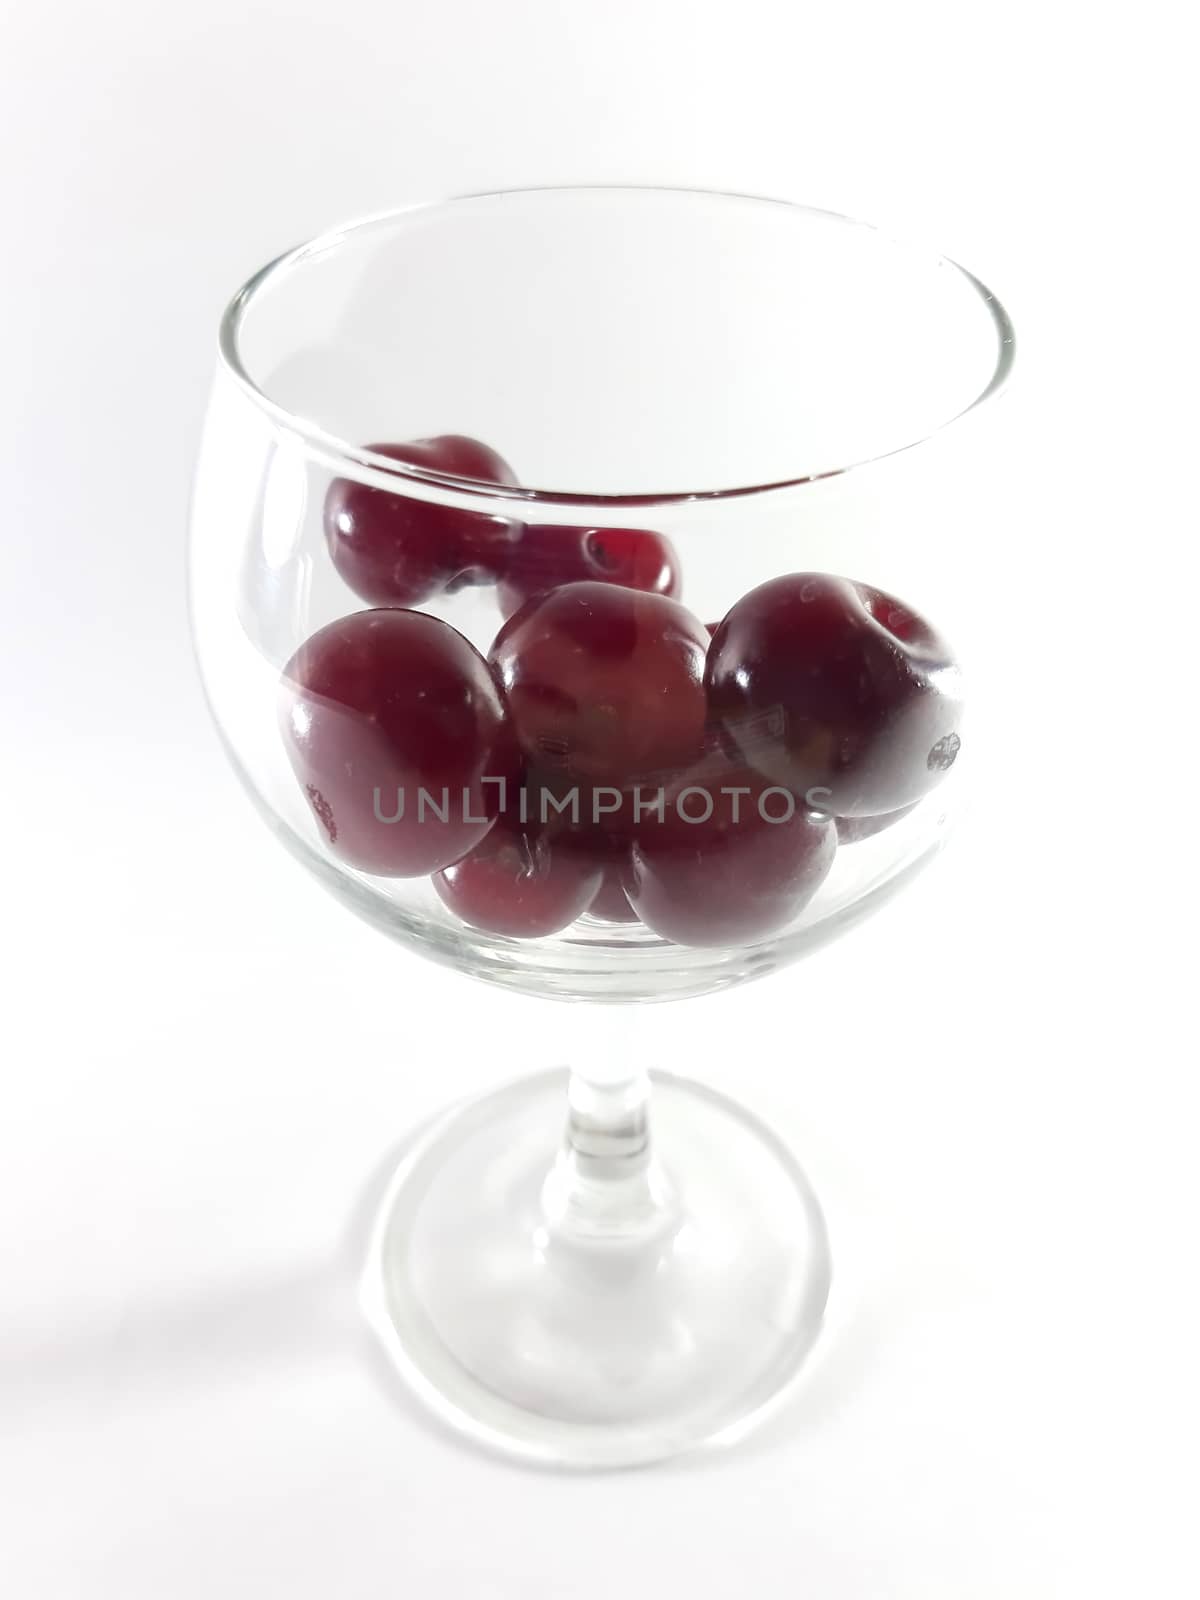 Cherry fruit in a transparent wineglass. Cherry for a snack. Pho by polyachenkovv@gmail.com